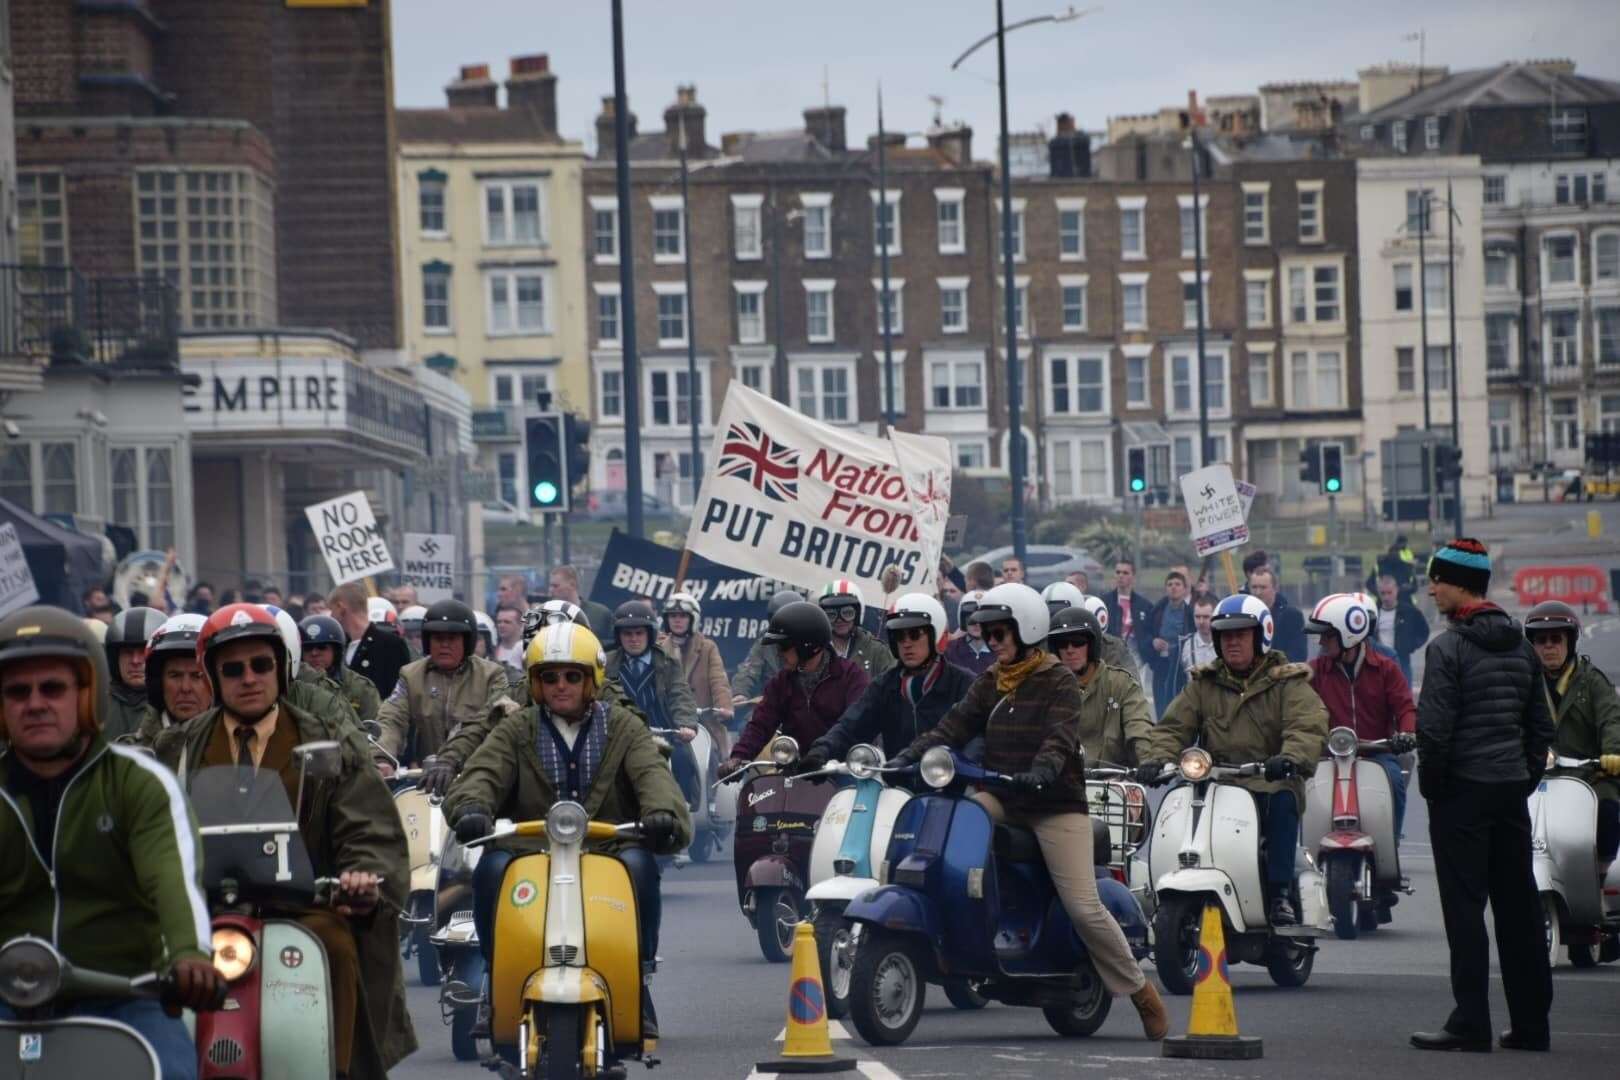 Mods took over the seafront as these scenes were filmed. Picture: Roberto Fabiani